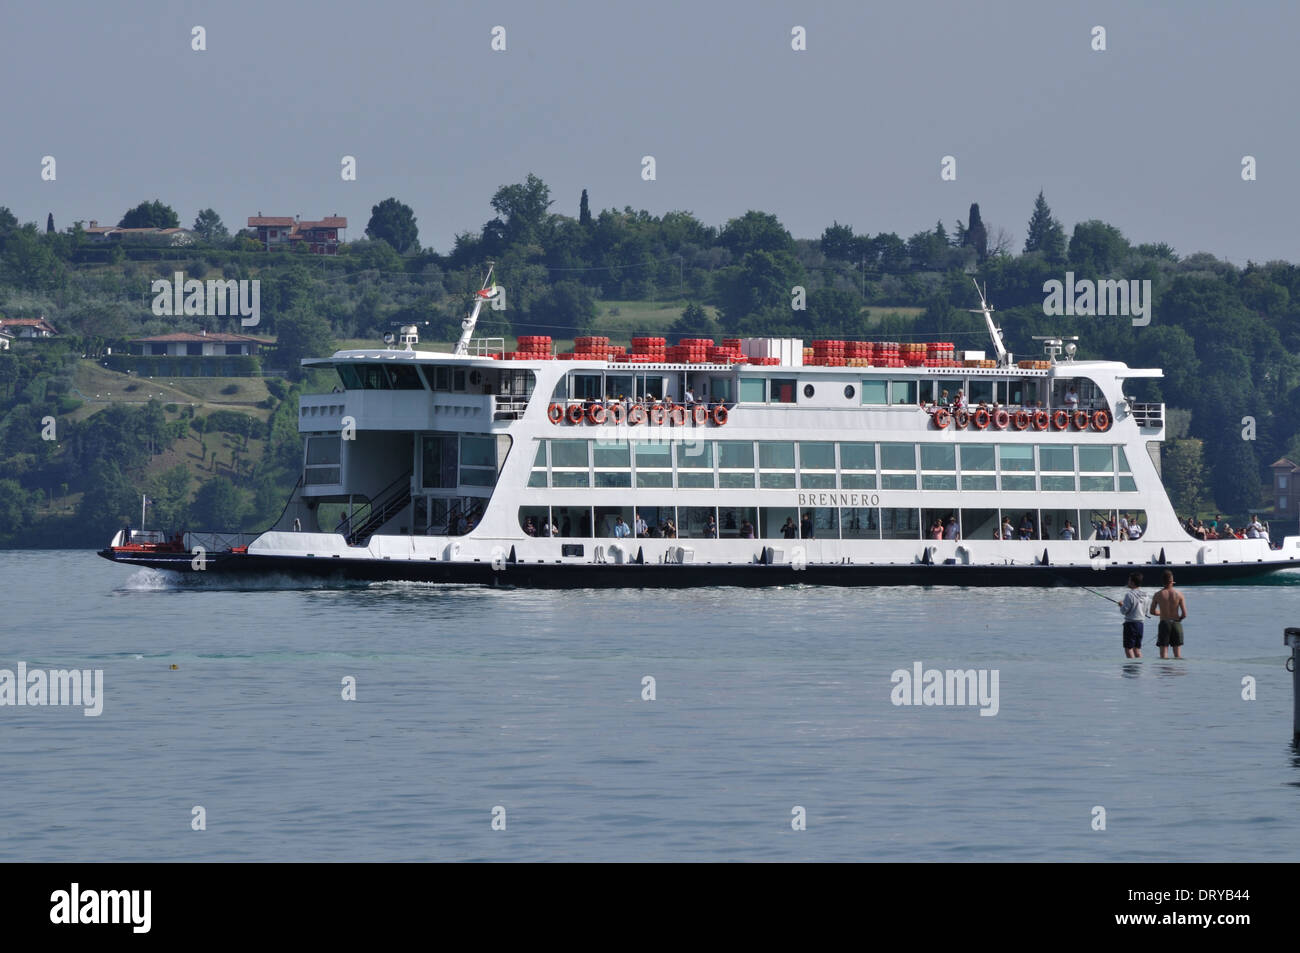 The car ferry Brennero, one of the largest ferries in the fleet, approaches  Gardone Riviera on Lake Garda Stock Photo - Alamy